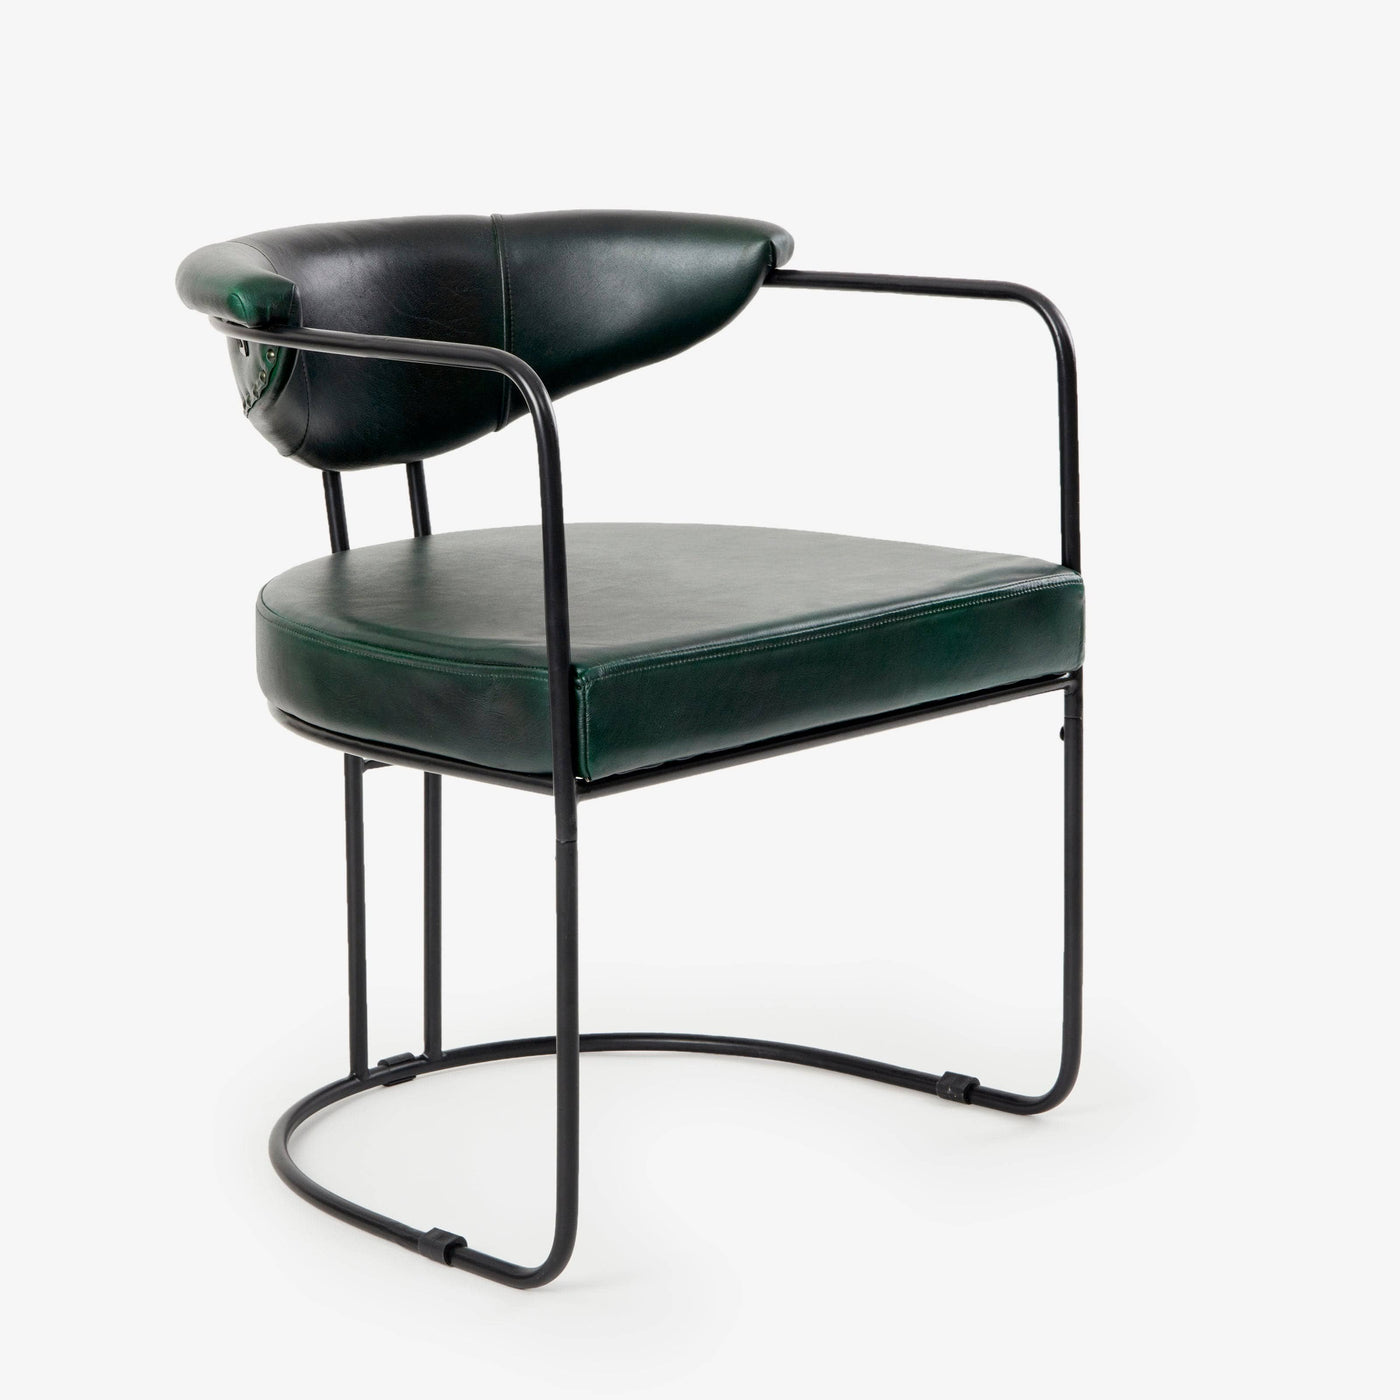 Itari Leather Armchair, Green Dining Chairs & Benches sazy.com